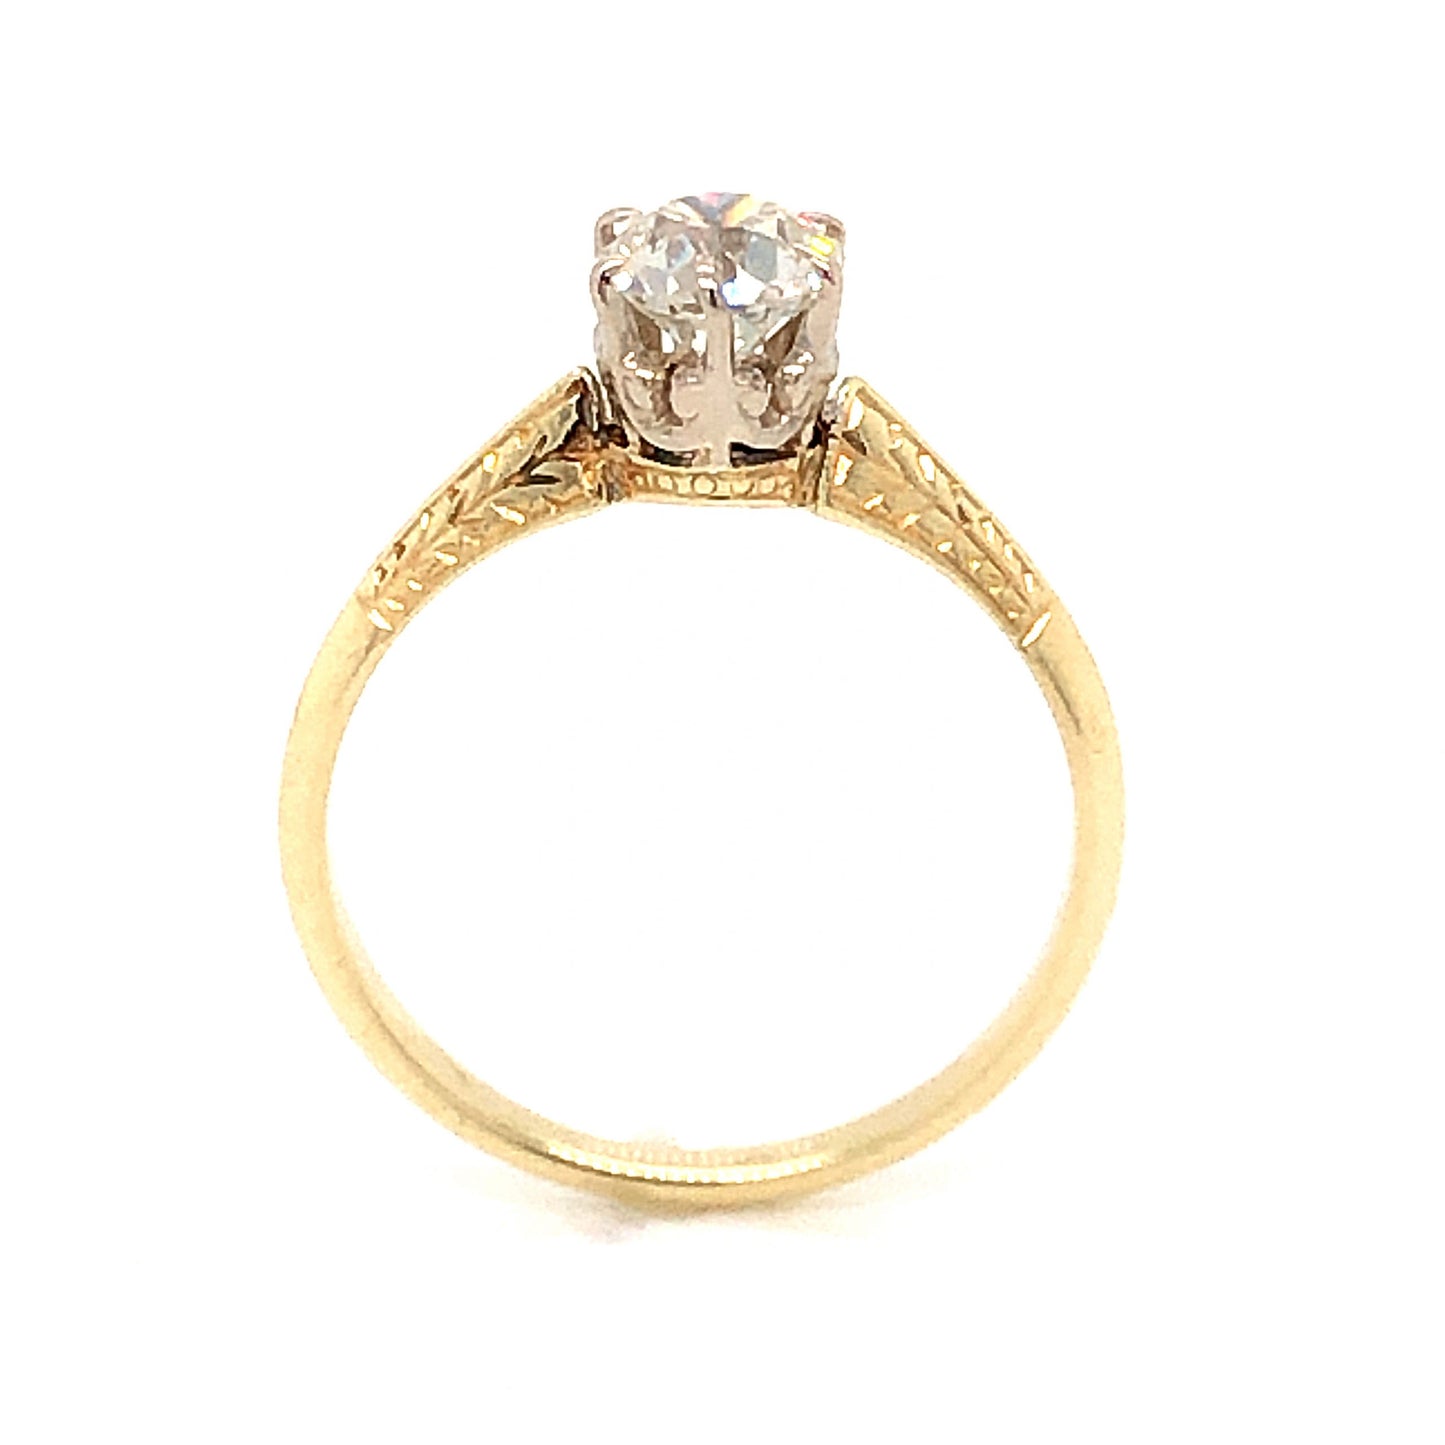 .62 Art Deco Two-Tone Diamond Engagement Ring in 14k Yellow Gold